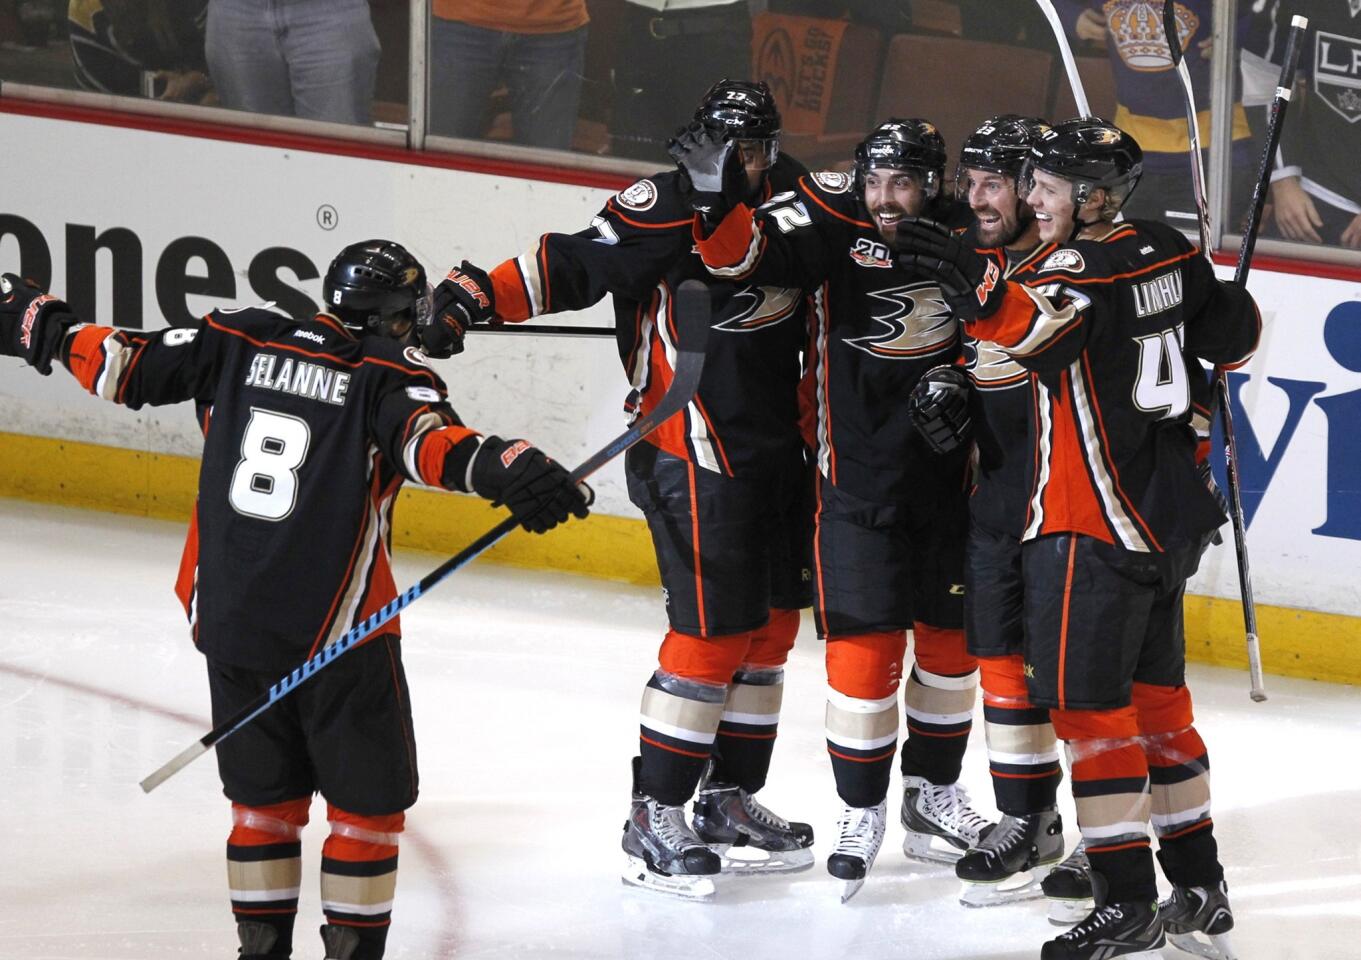 Ducks players celebrate a second-period goal by Devante Smith-Pelly against the Kings in Game 5 of the Western Conference semifinals at Honda Center.